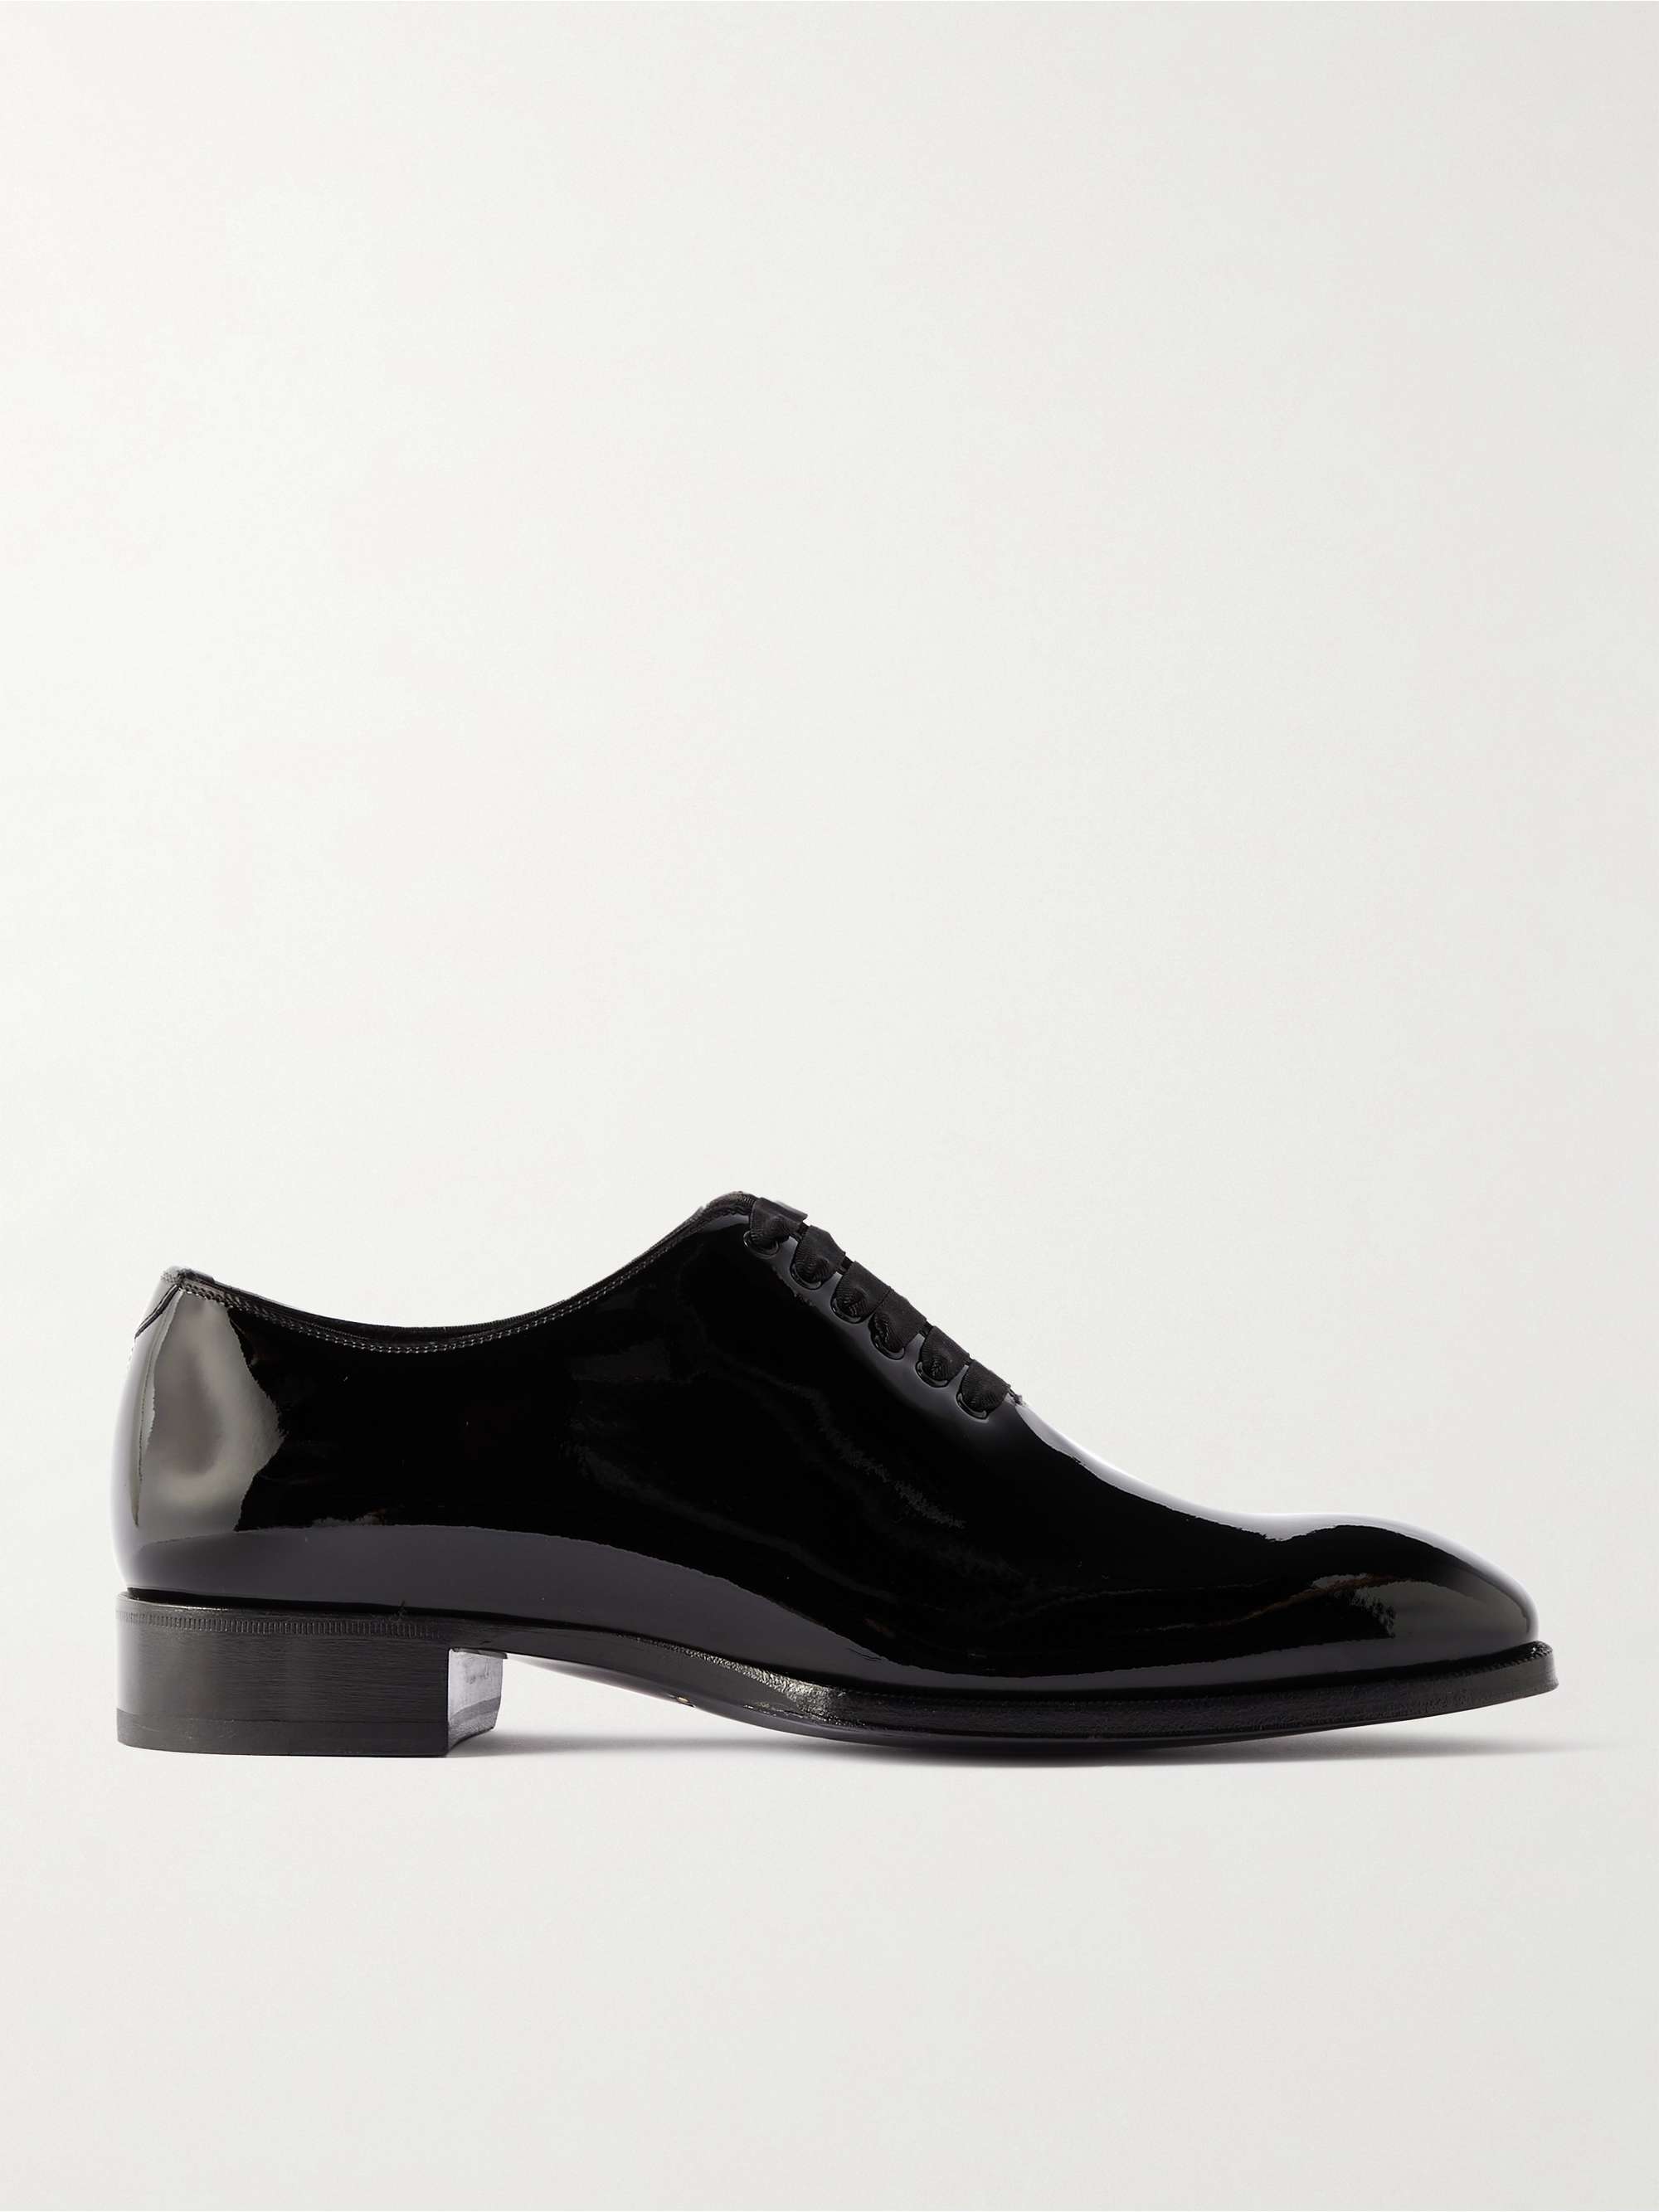 TOM FORD Elkan Whole-Cut Patent-Leather Oxford Shoes | MR PORTER